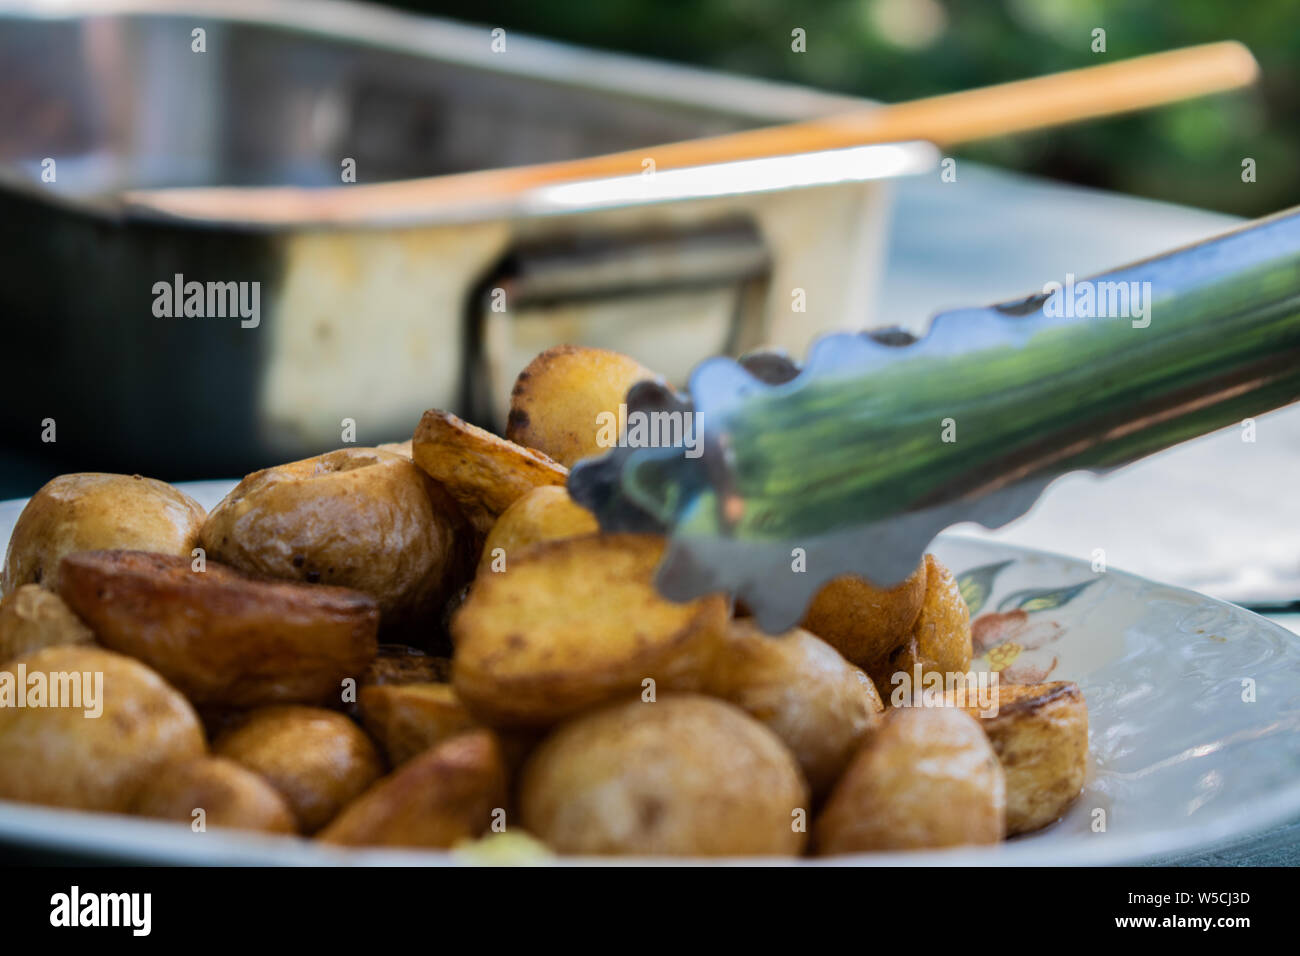 Baked golden potatoes delicious food on a white plate, ready to eat - Romanian food. Stock Photo